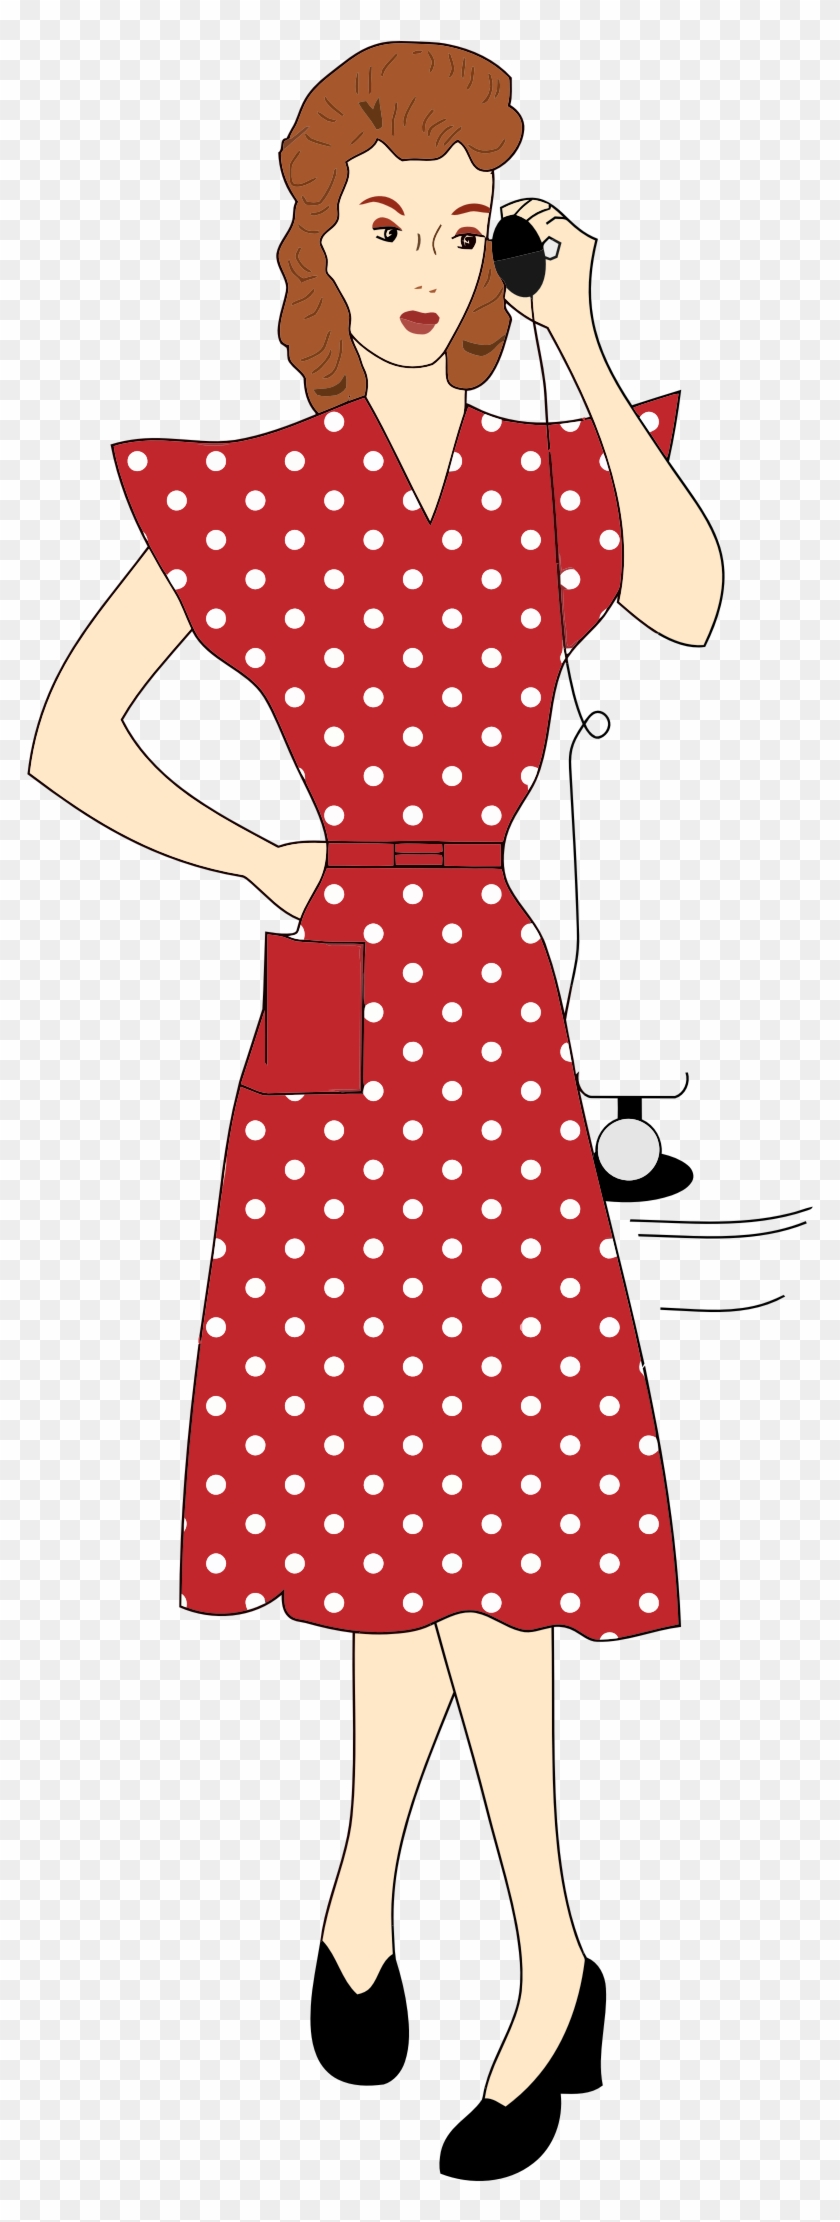 This Free Icons Png Design Of Vintage 1940s Woman Using - 1940s Clip Art Transparent Png #5106514